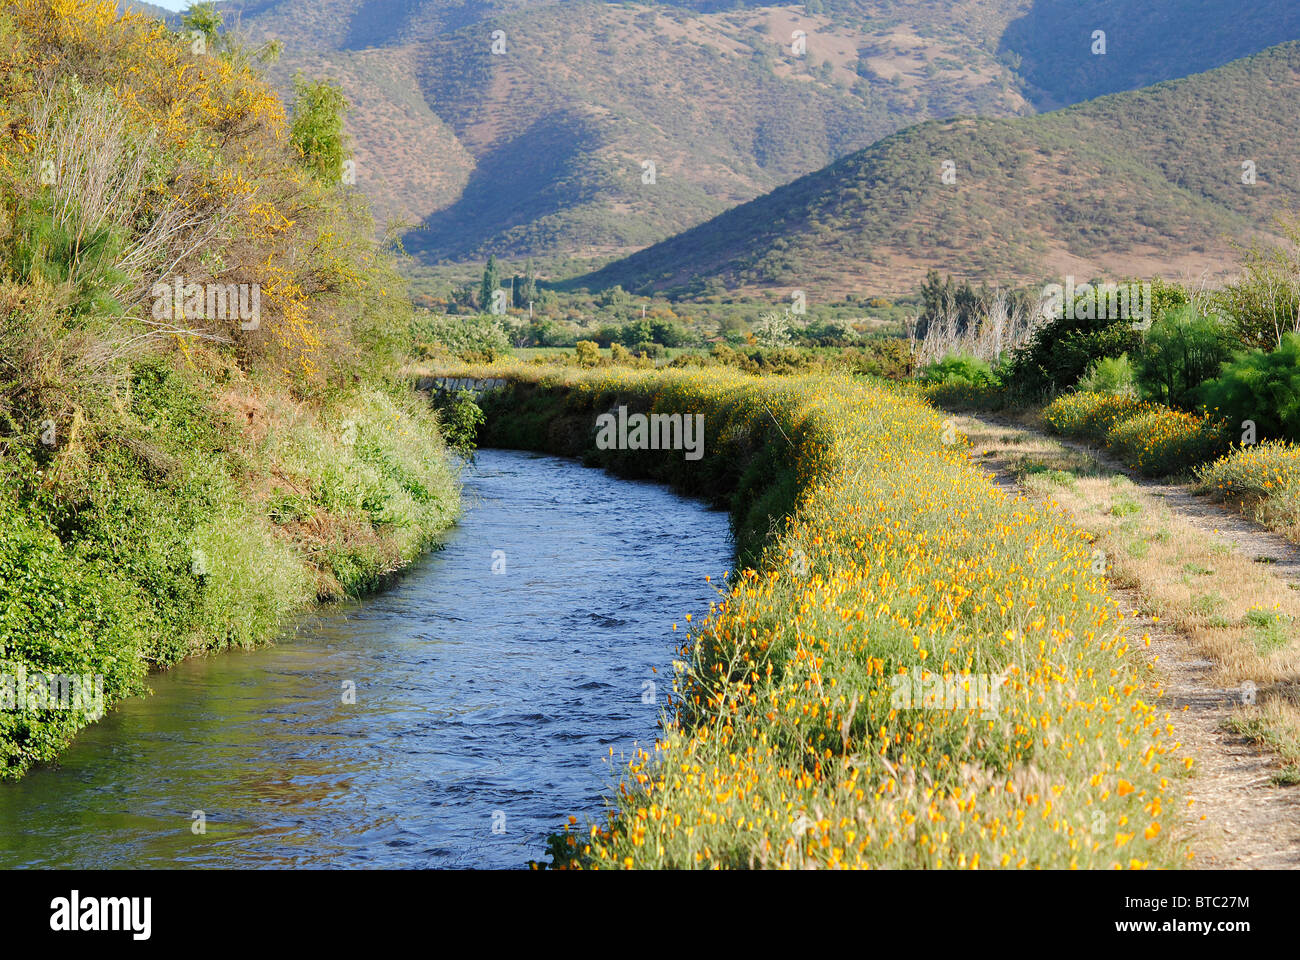 Main channel of irrigation water Stock Photo